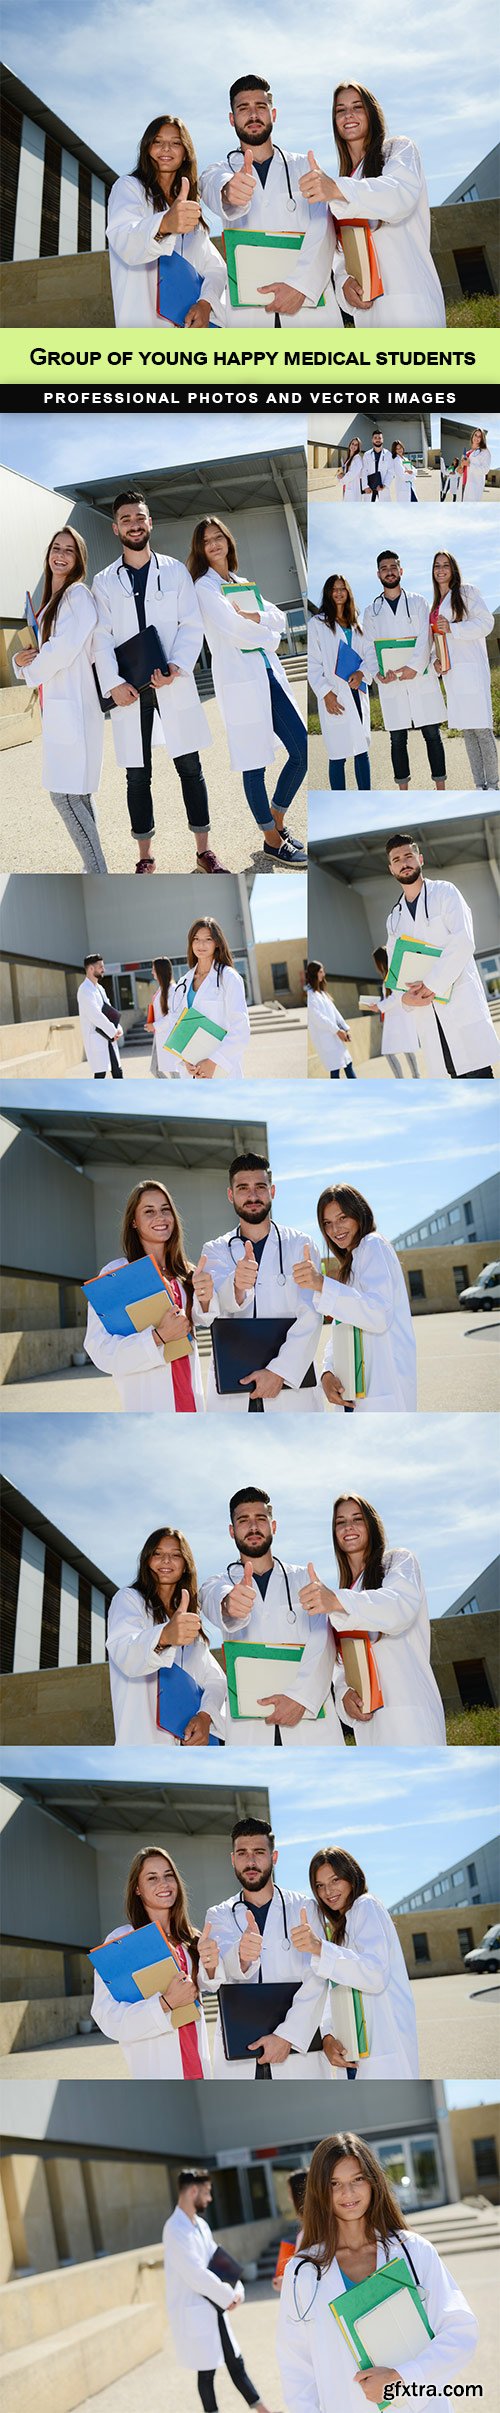 Group of young happy medical students - 10 UHQ JPEG